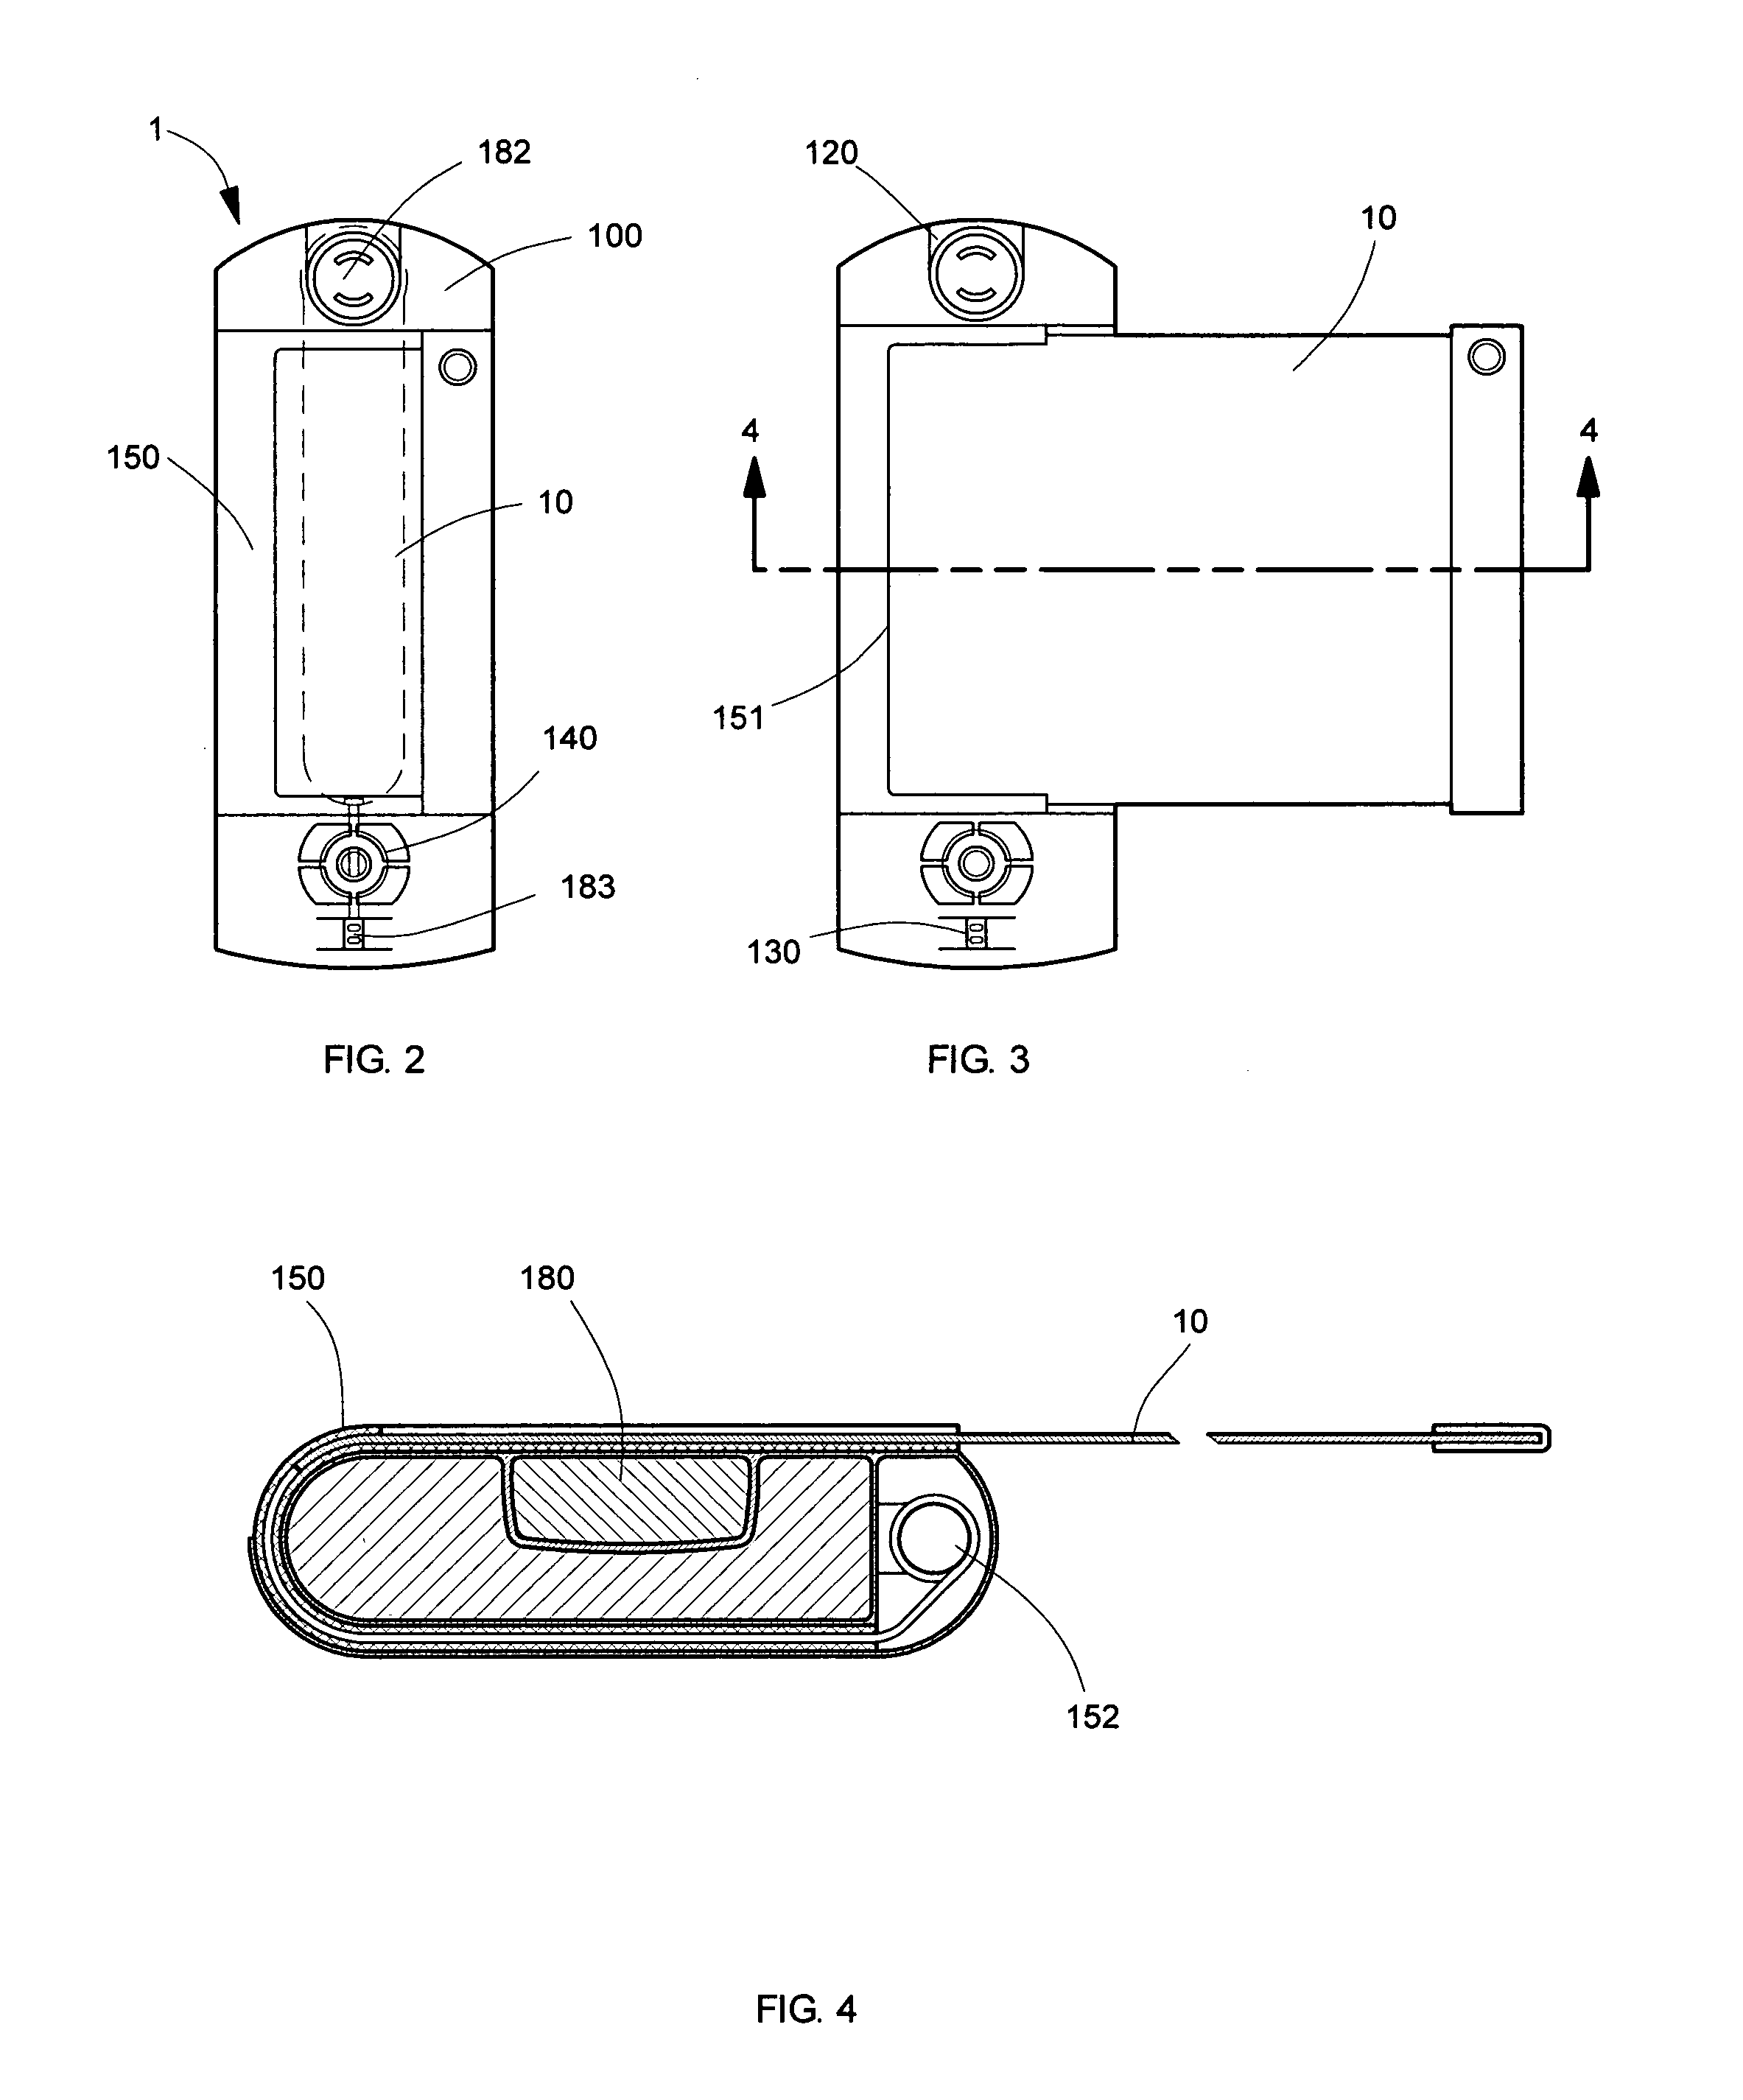 Personal digital device with adjustable interface